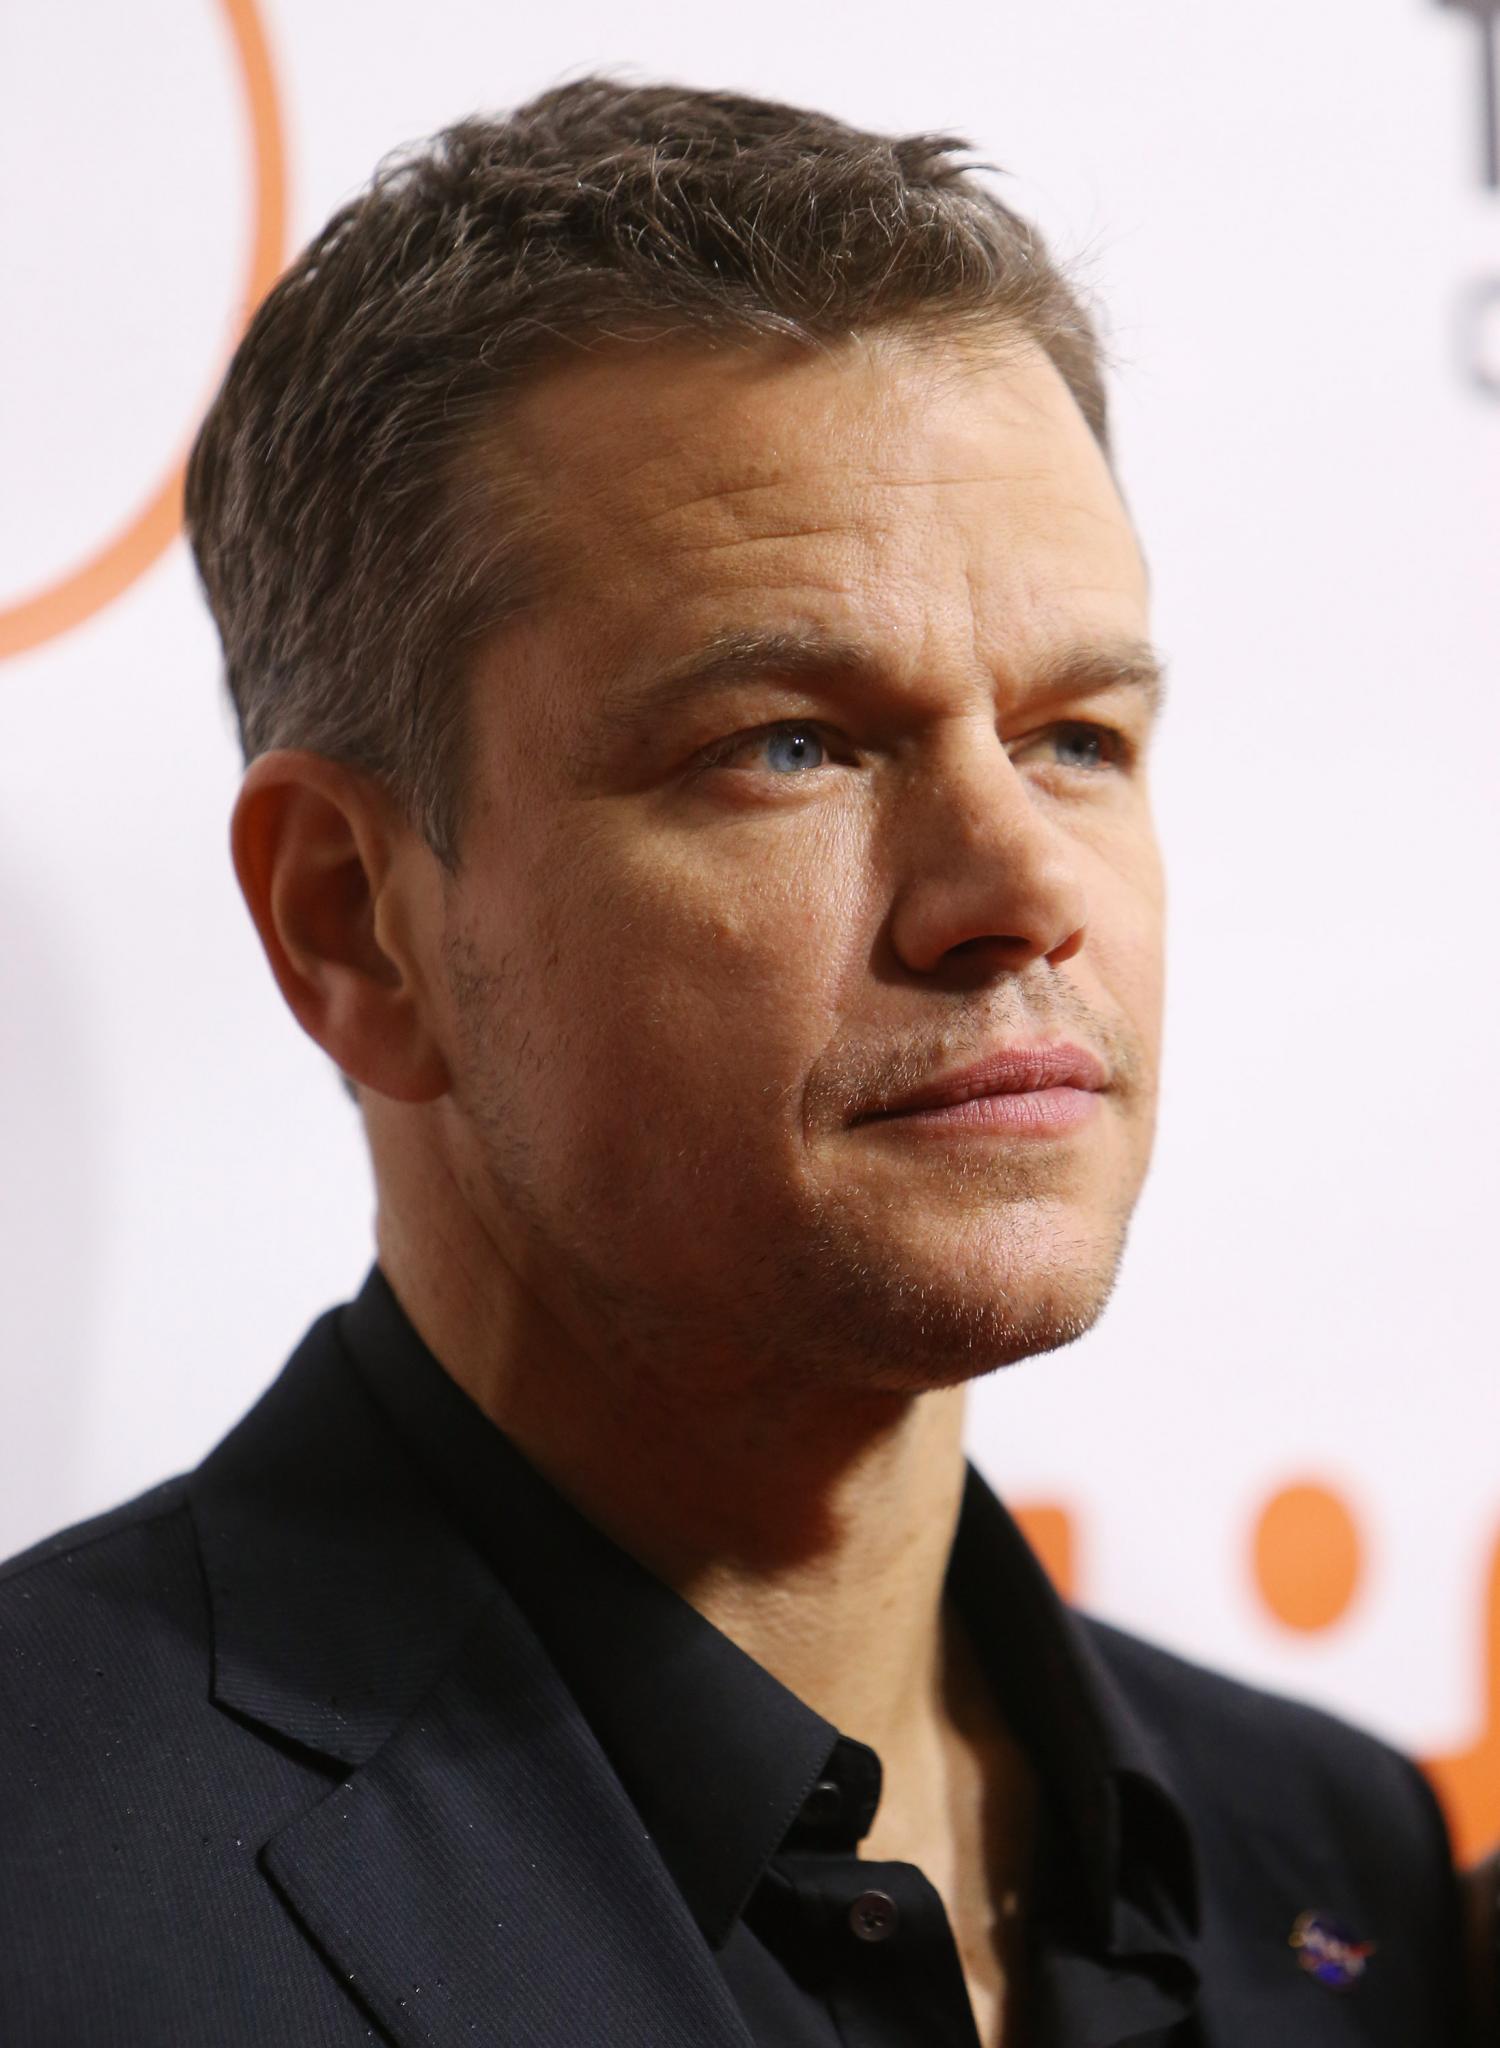 Matt Damon Apologizes for Diversity Remarks: 'I Believe There Needs to be More Diverse Filmmakers'